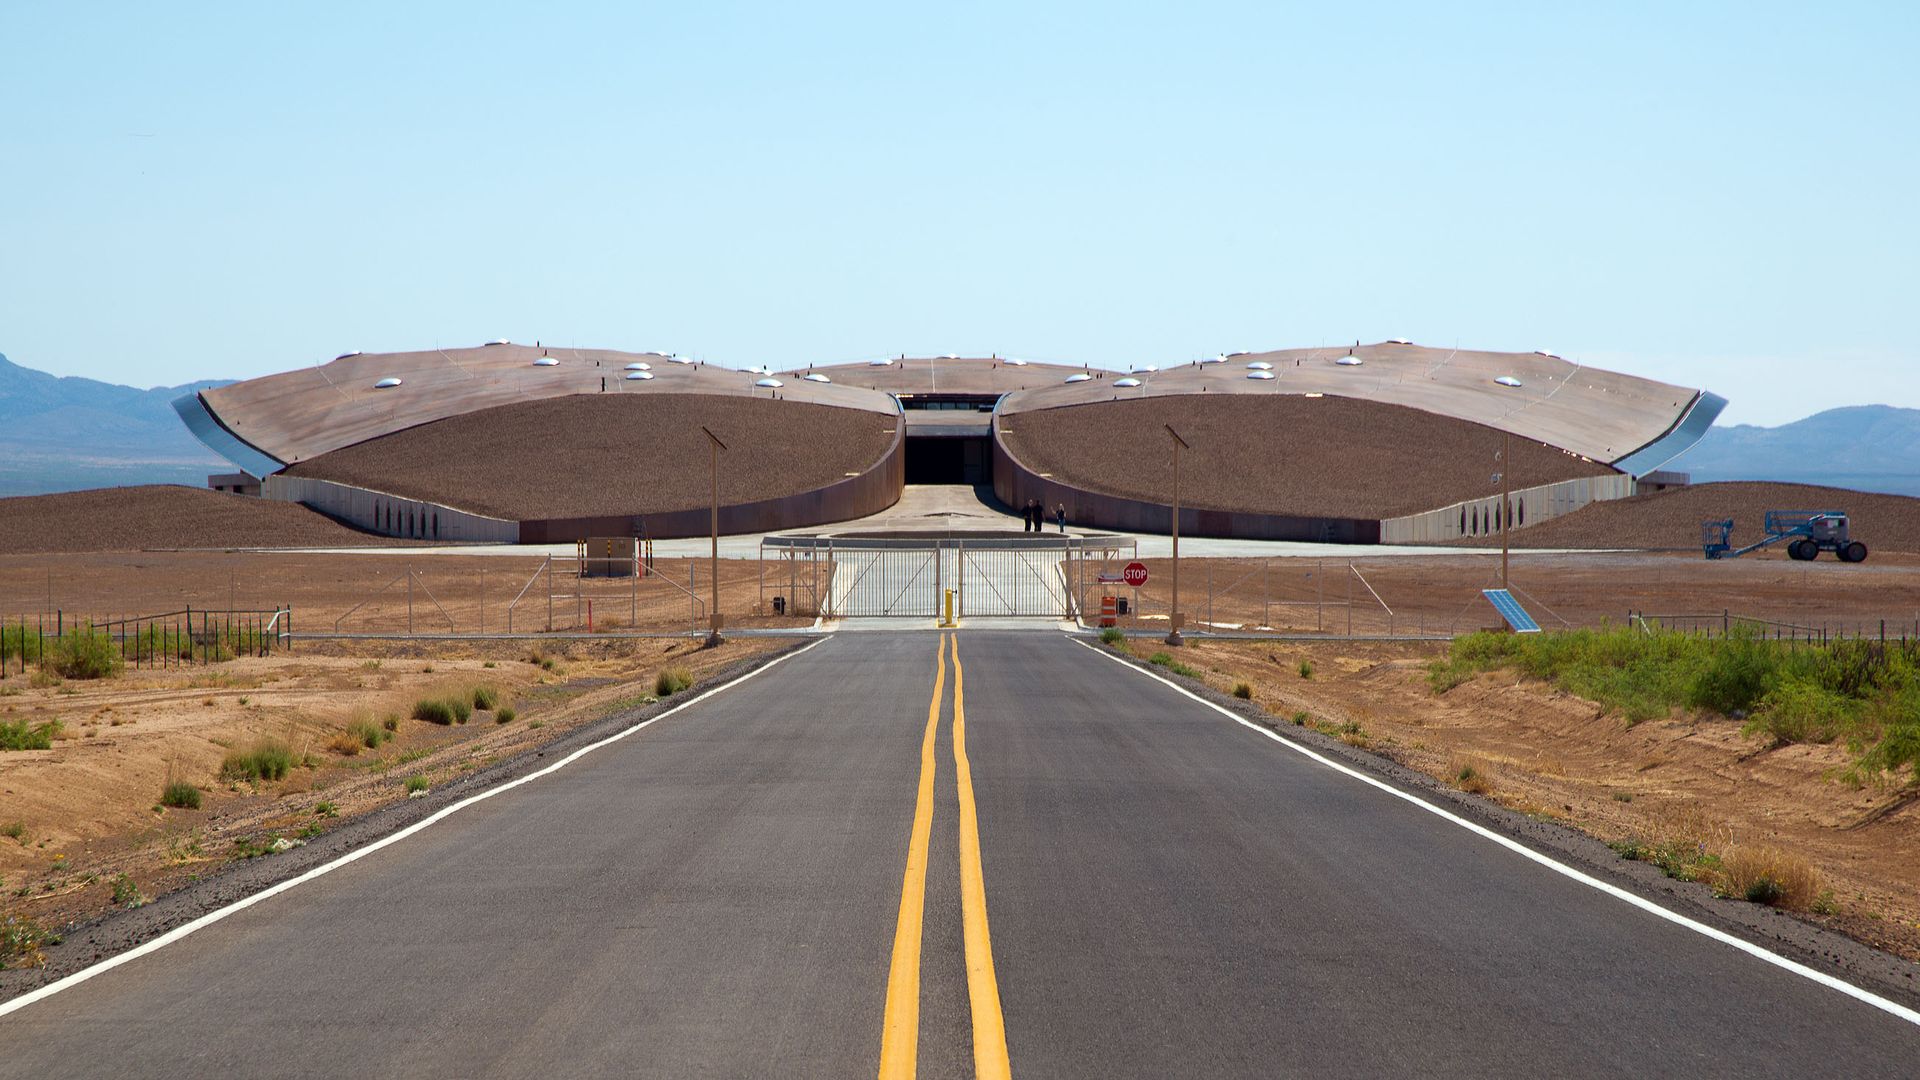 In this image, Spaceport America is seen at the end of a long desert road. It looks like a large drone.